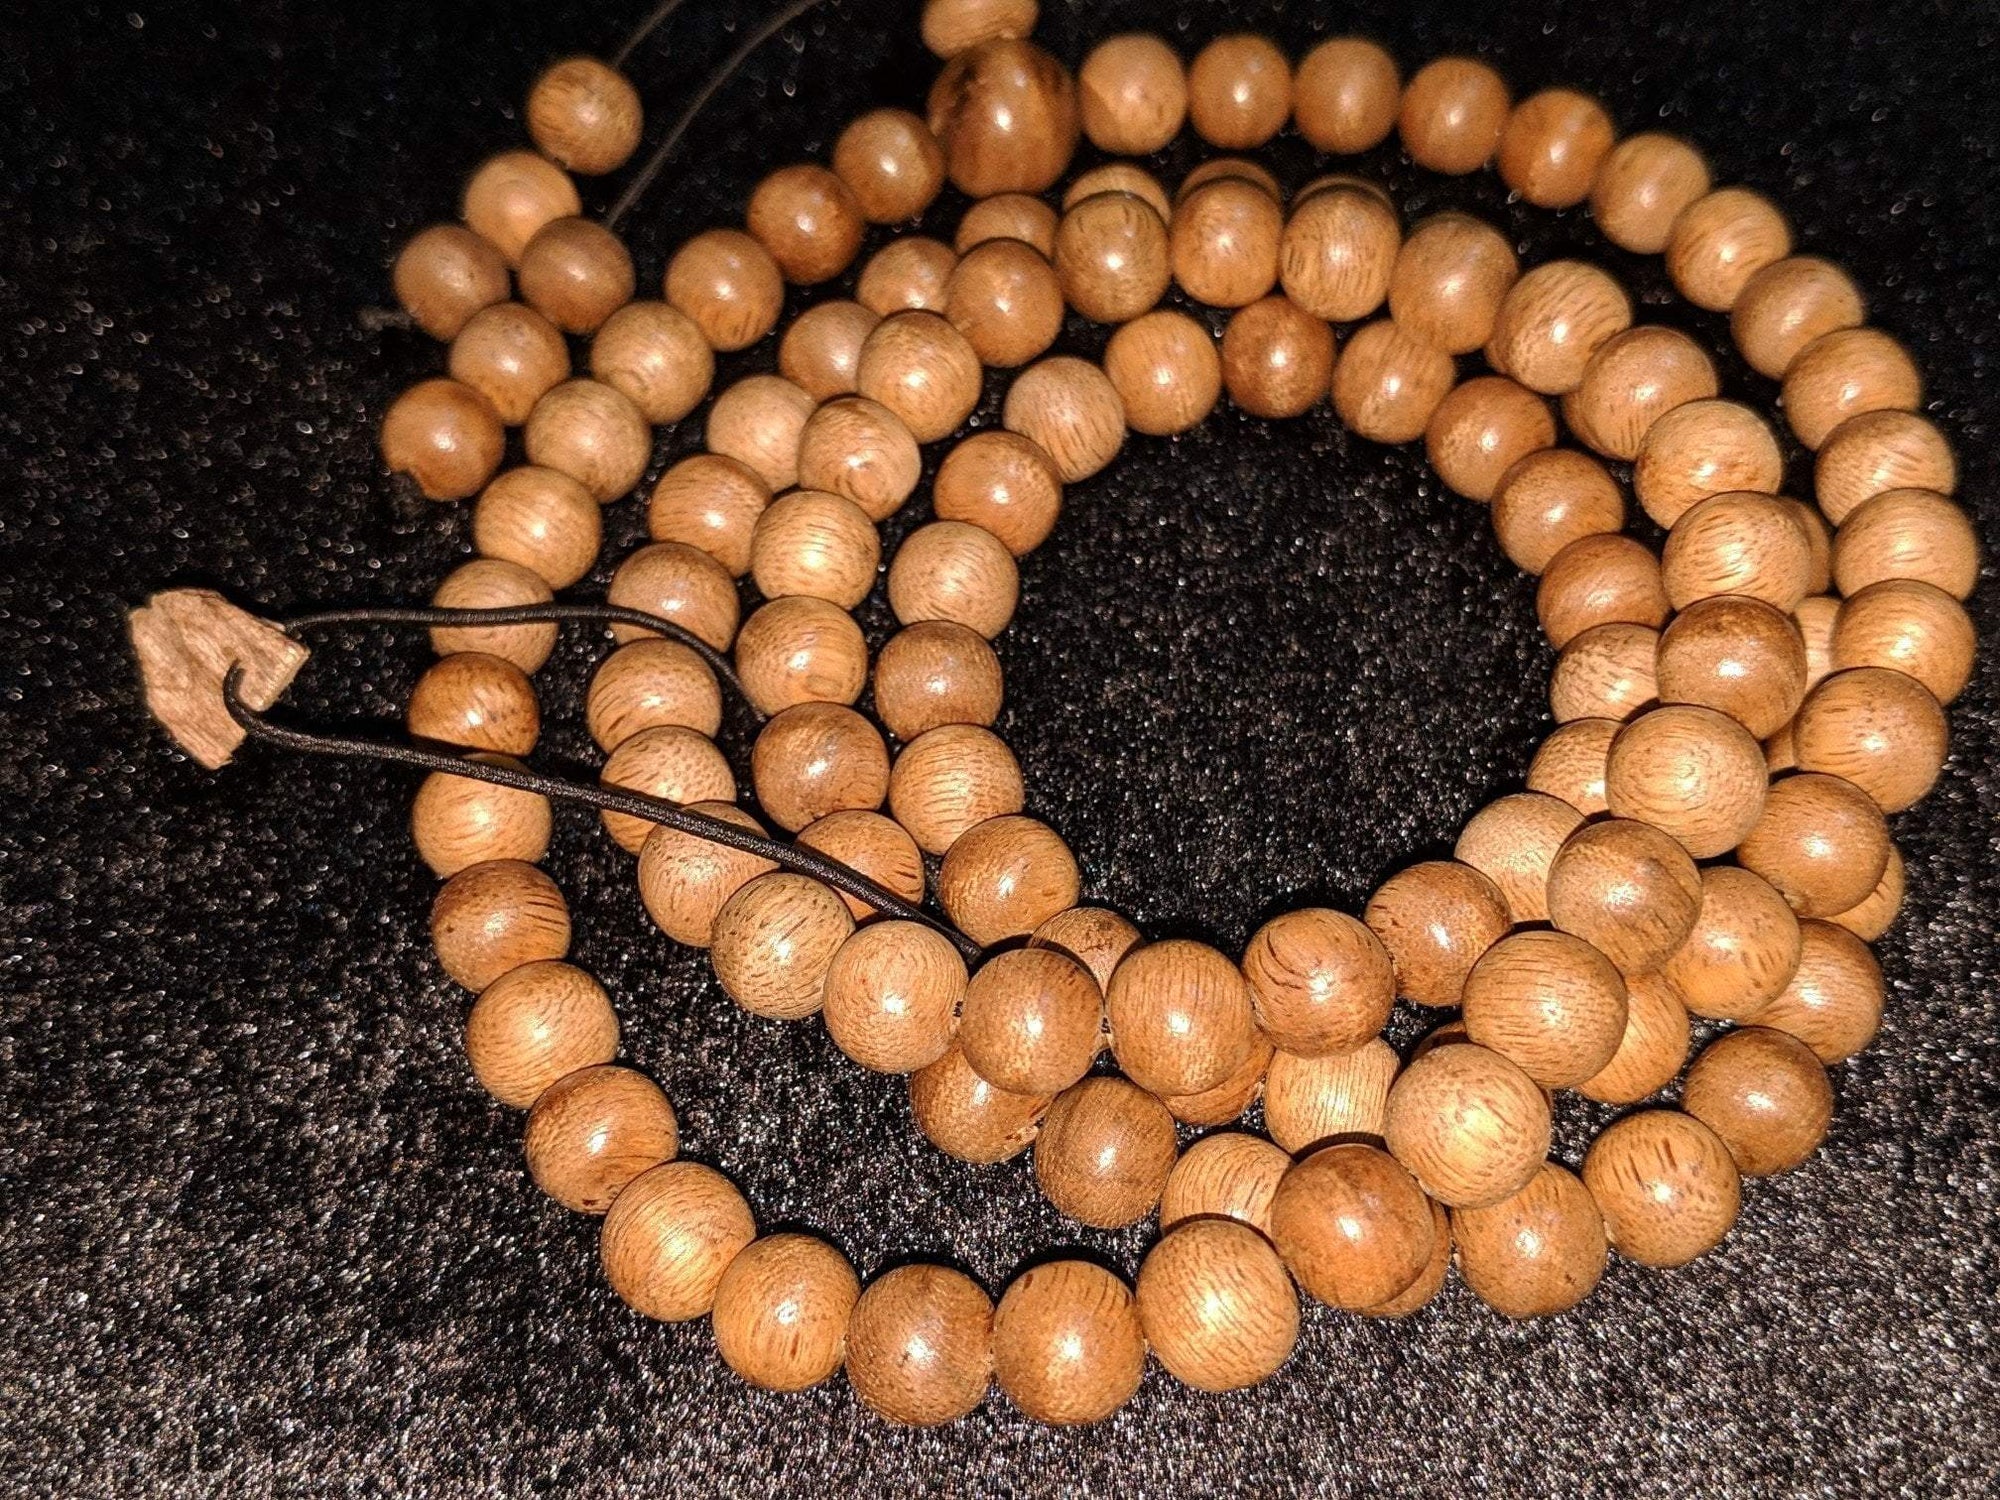 SOLD-The Contentment Wild Borneo Agarwood Mala 8mm 20g 108 beads plus 6 extras and 1 piece of material -